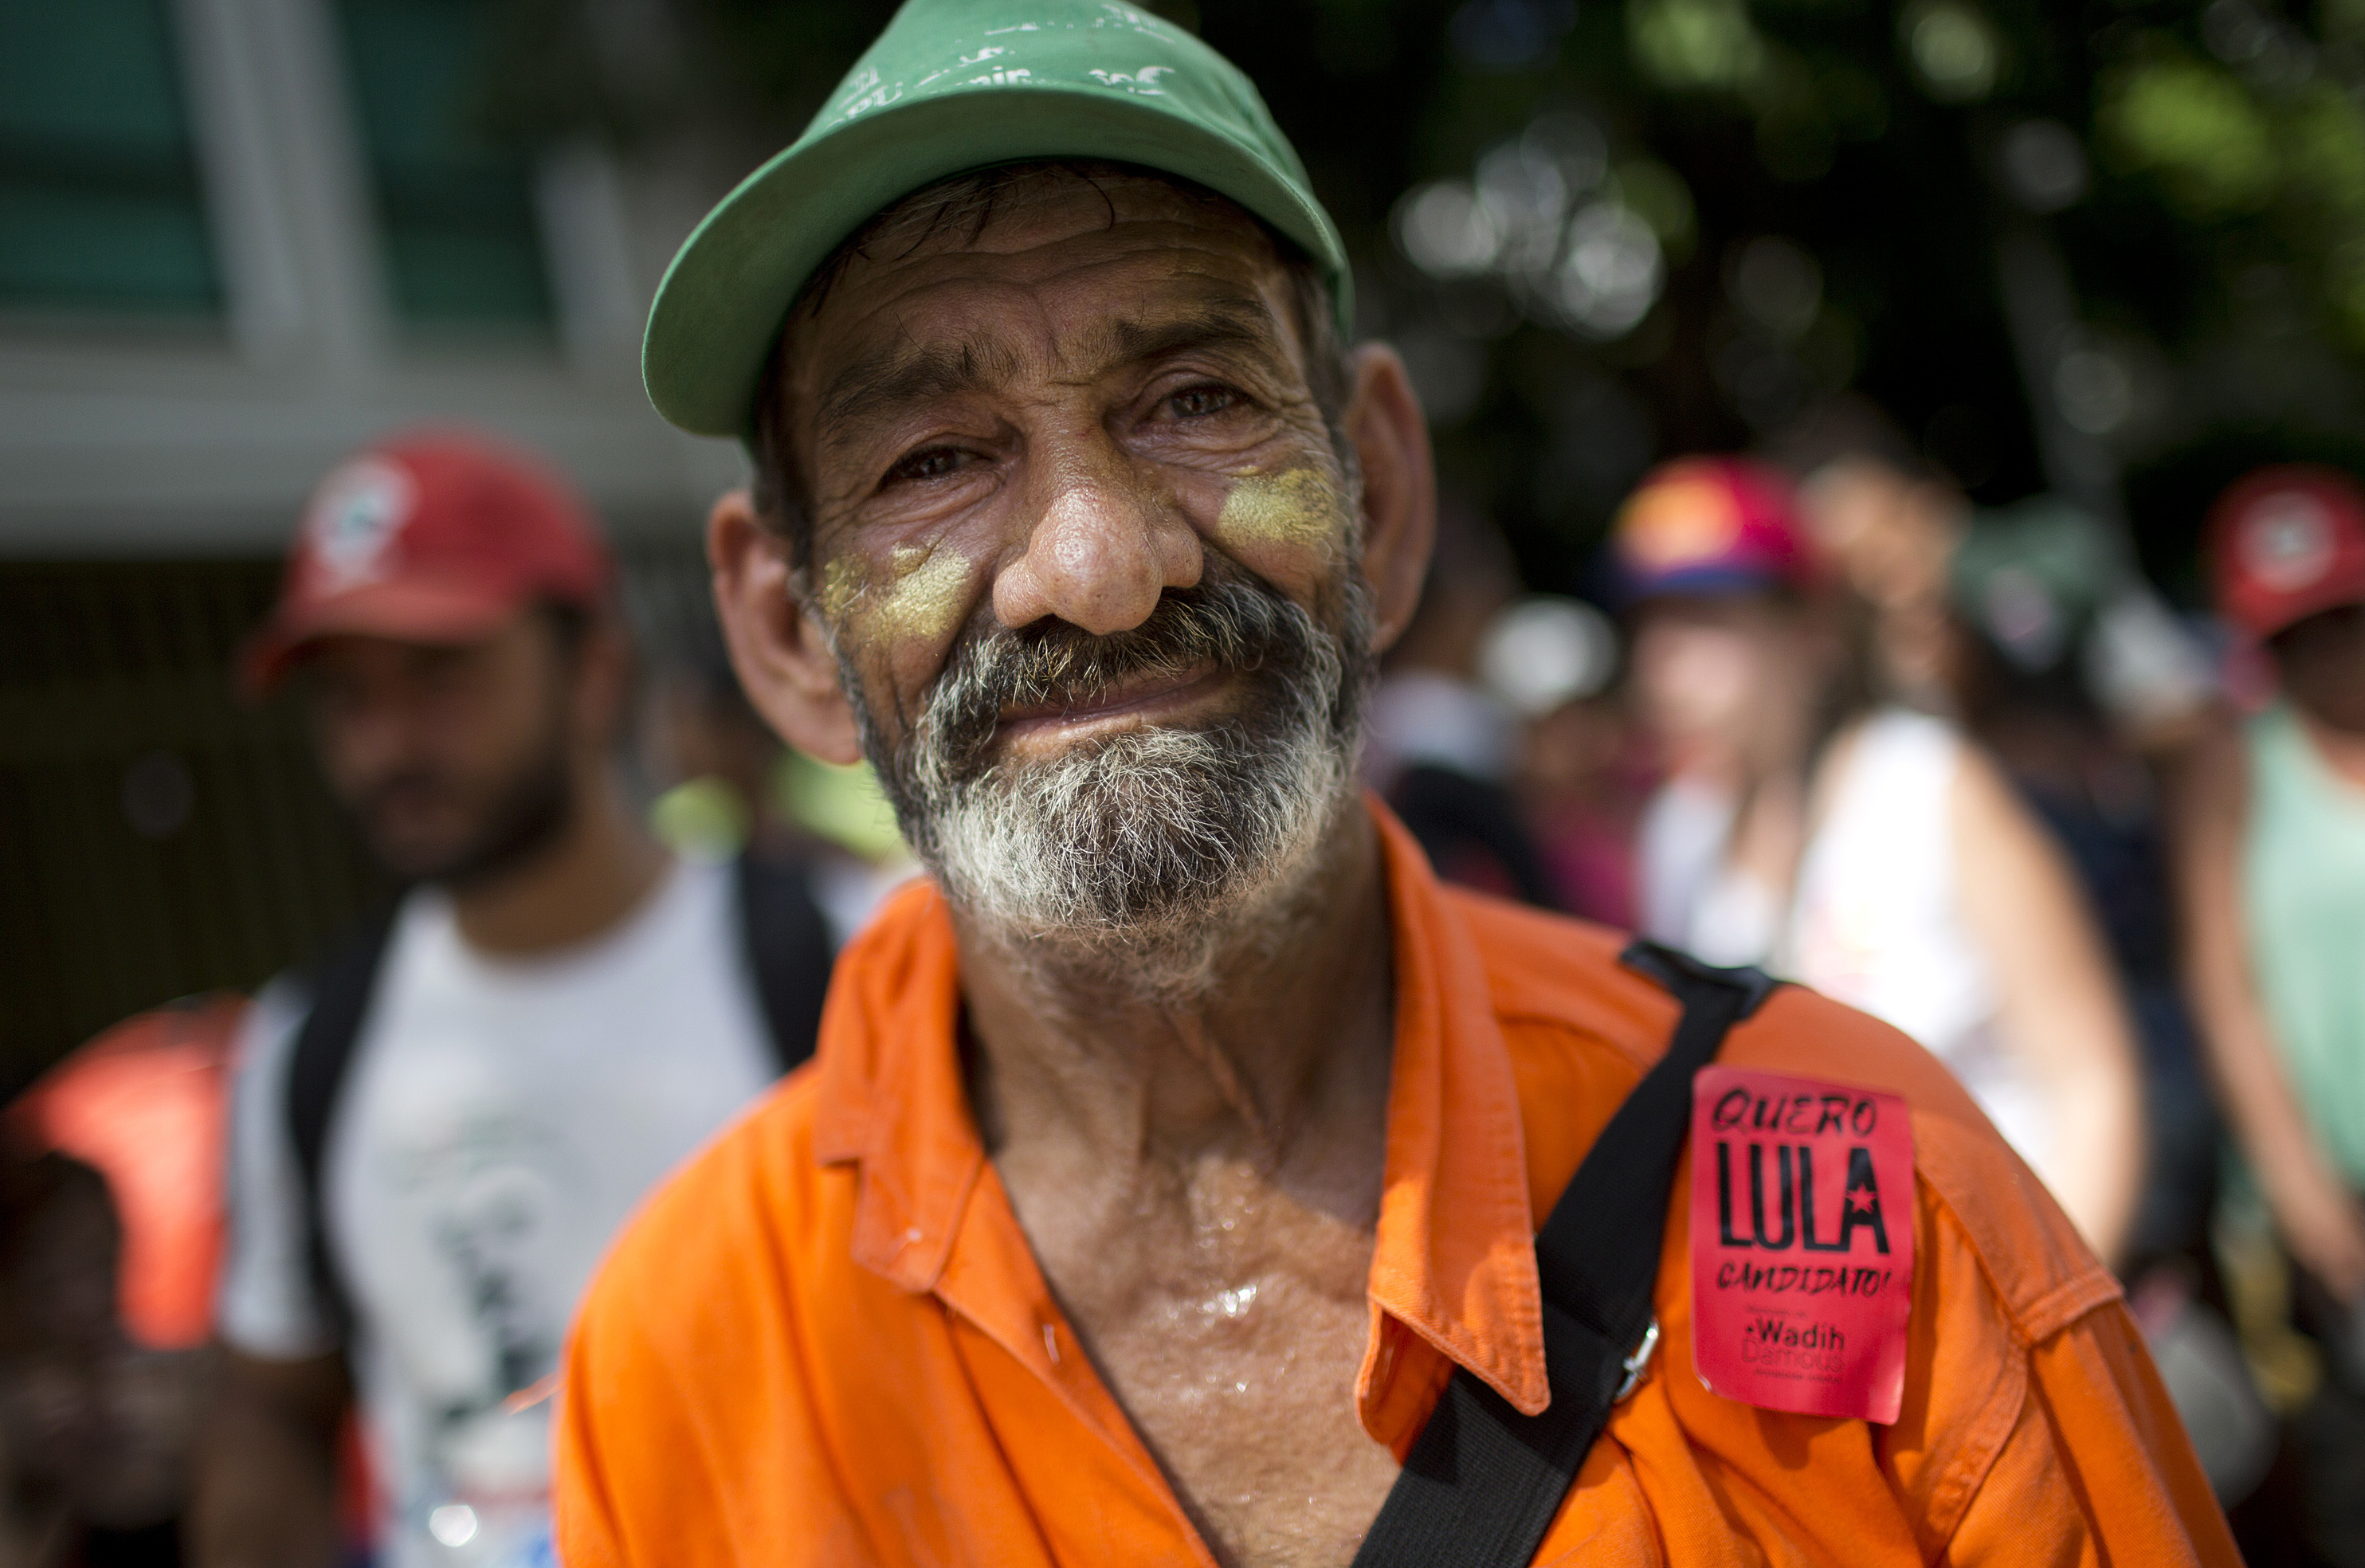 Worker Sebastian takes part in a protest in support of former Brazilian President Luiz Inacio Lula da Silva in Rio de Janeiro, Brazil, Wednesday, Jan. 24, 2018. An appellate court in Brazil on Wednesday considered whether to uphold or throw out a corruption conviction against former da Silva, a decision that could impact presidential elections and even stability in Latin America's largest nation. (AP Photo/Silvia Izquierdo)